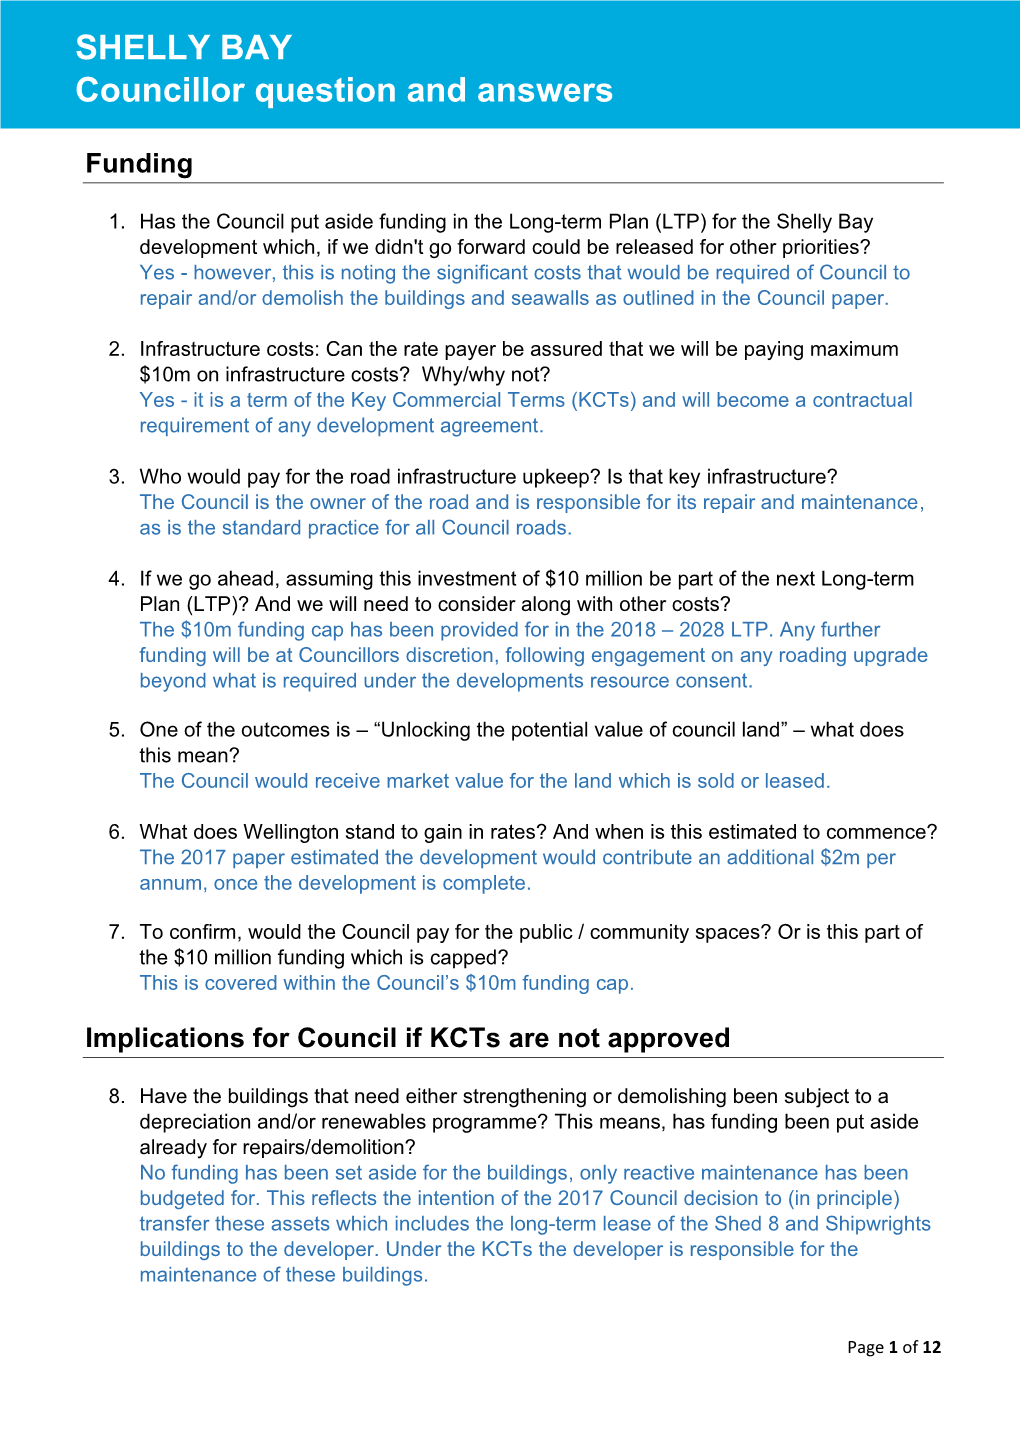 SHELLY BAY Councillor Question and Answers - 2 Funding